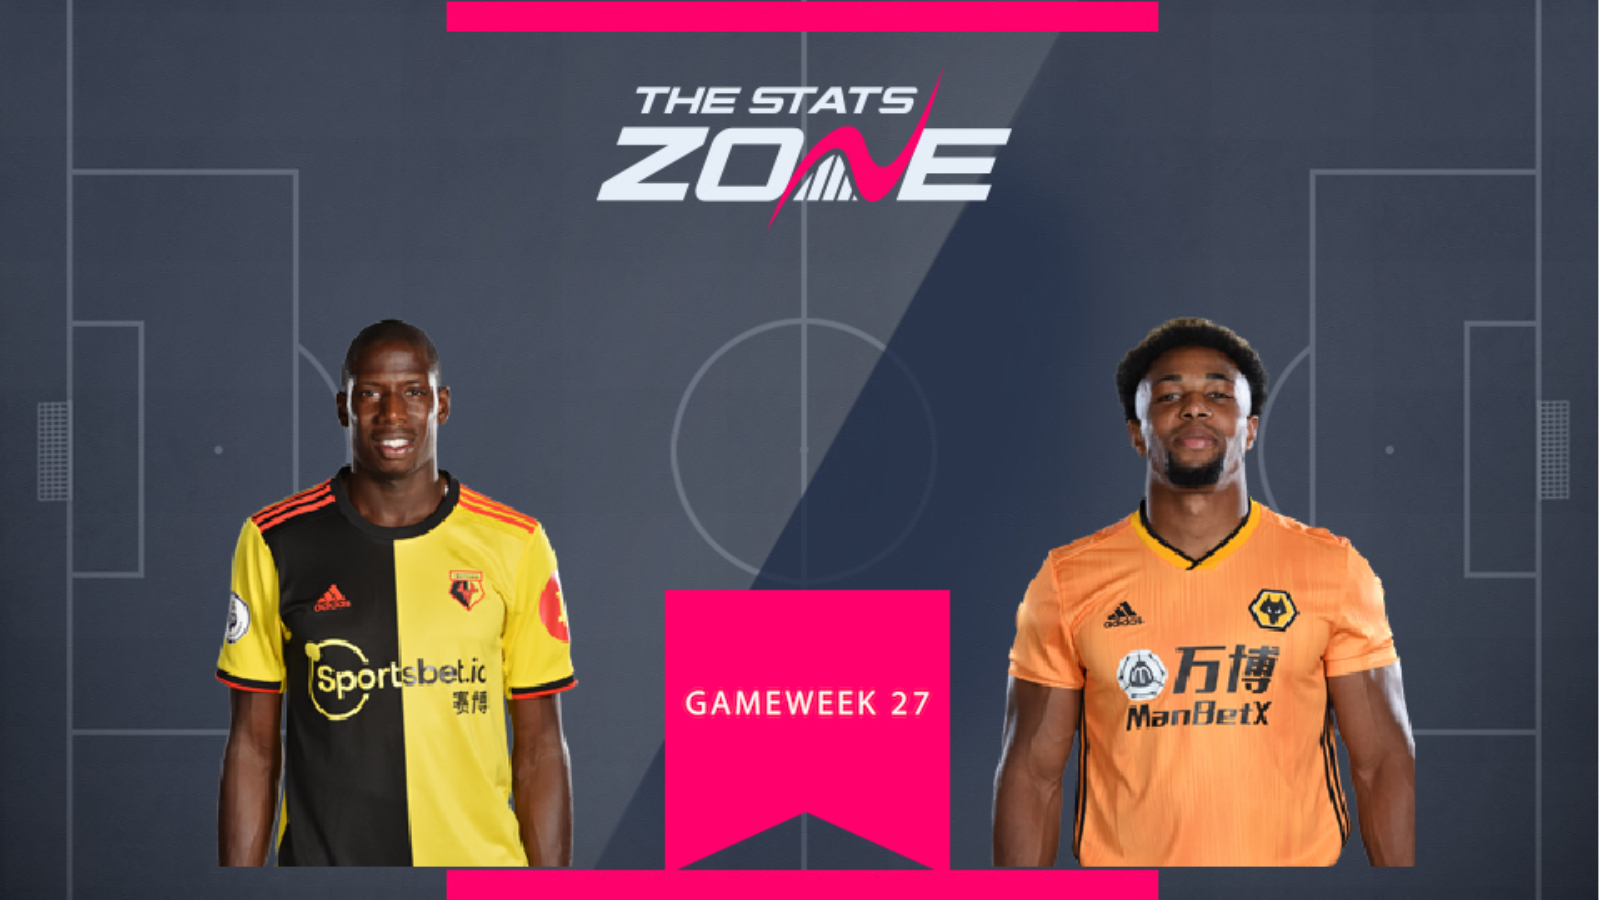 Fpl Gameweek 27 Head To Head Comparisons Abdoulaye Doucoure Vs Adama Traore The Stats Zone